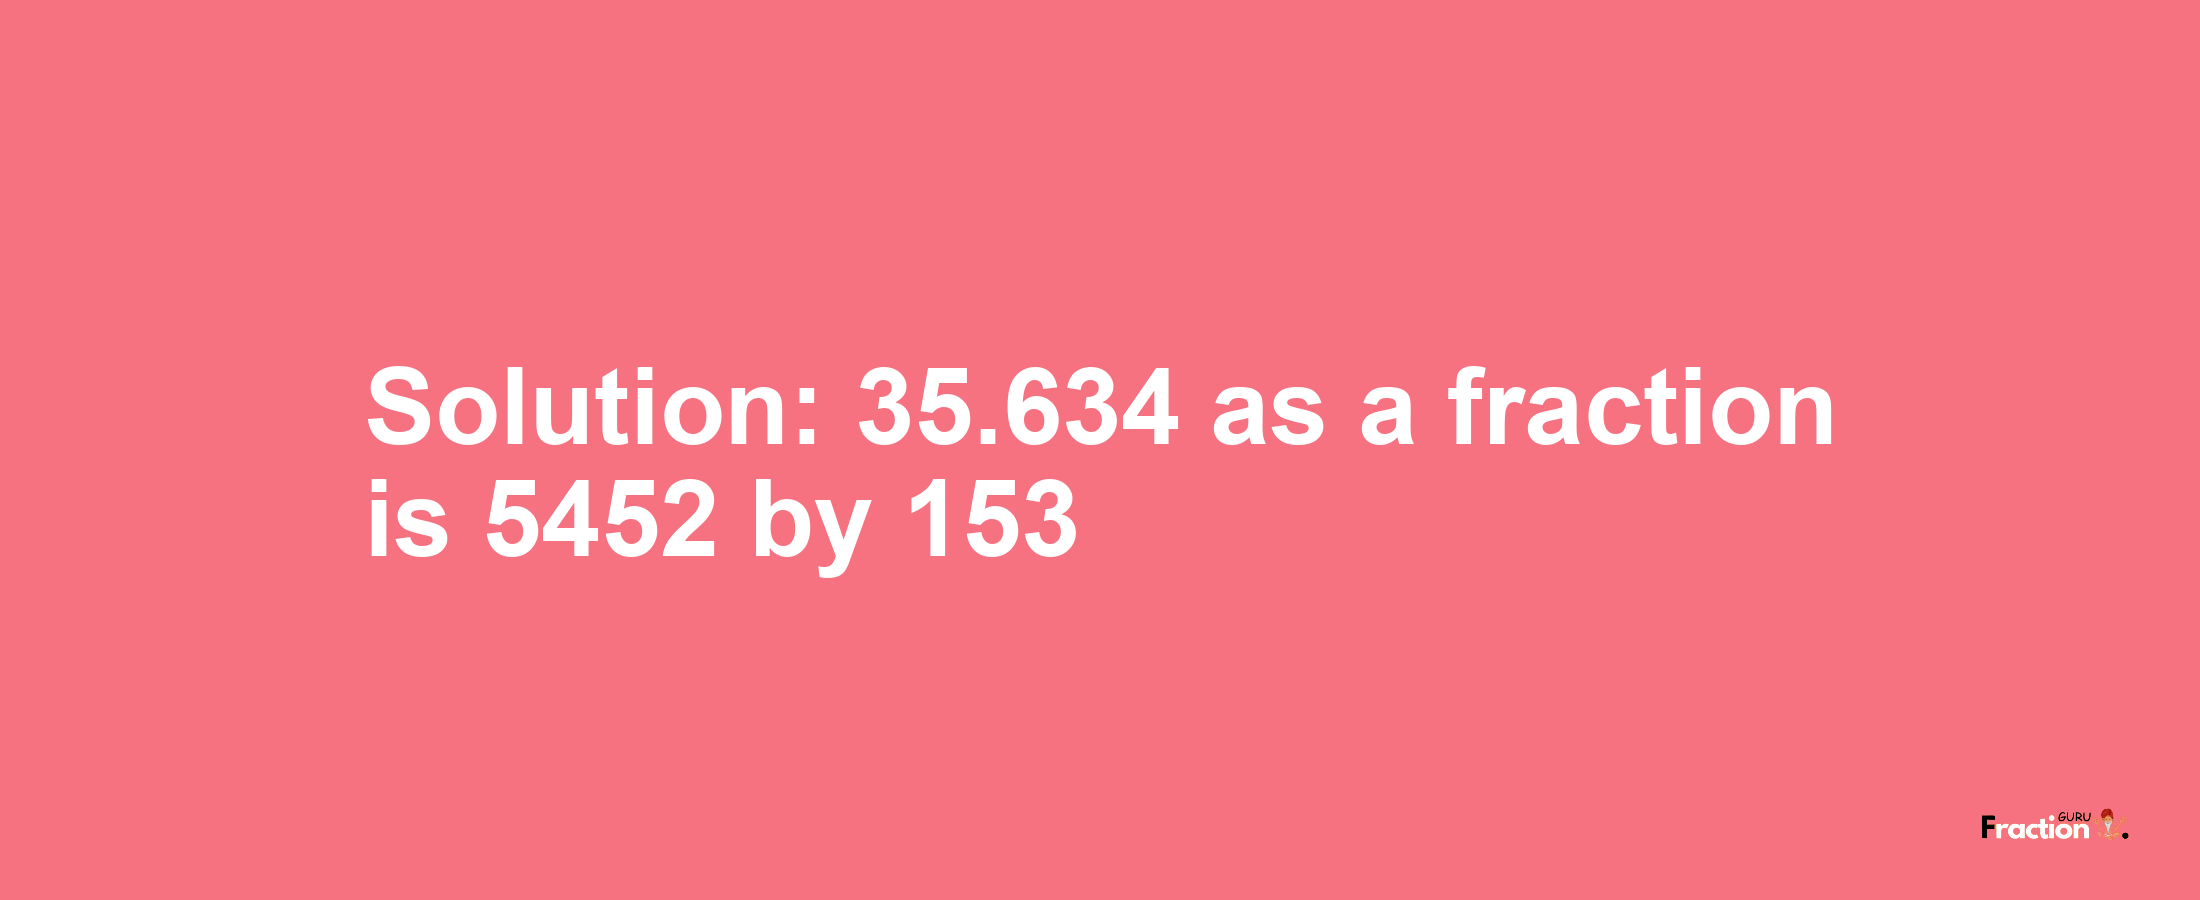 Solution:35.634 as a fraction is 5452/153